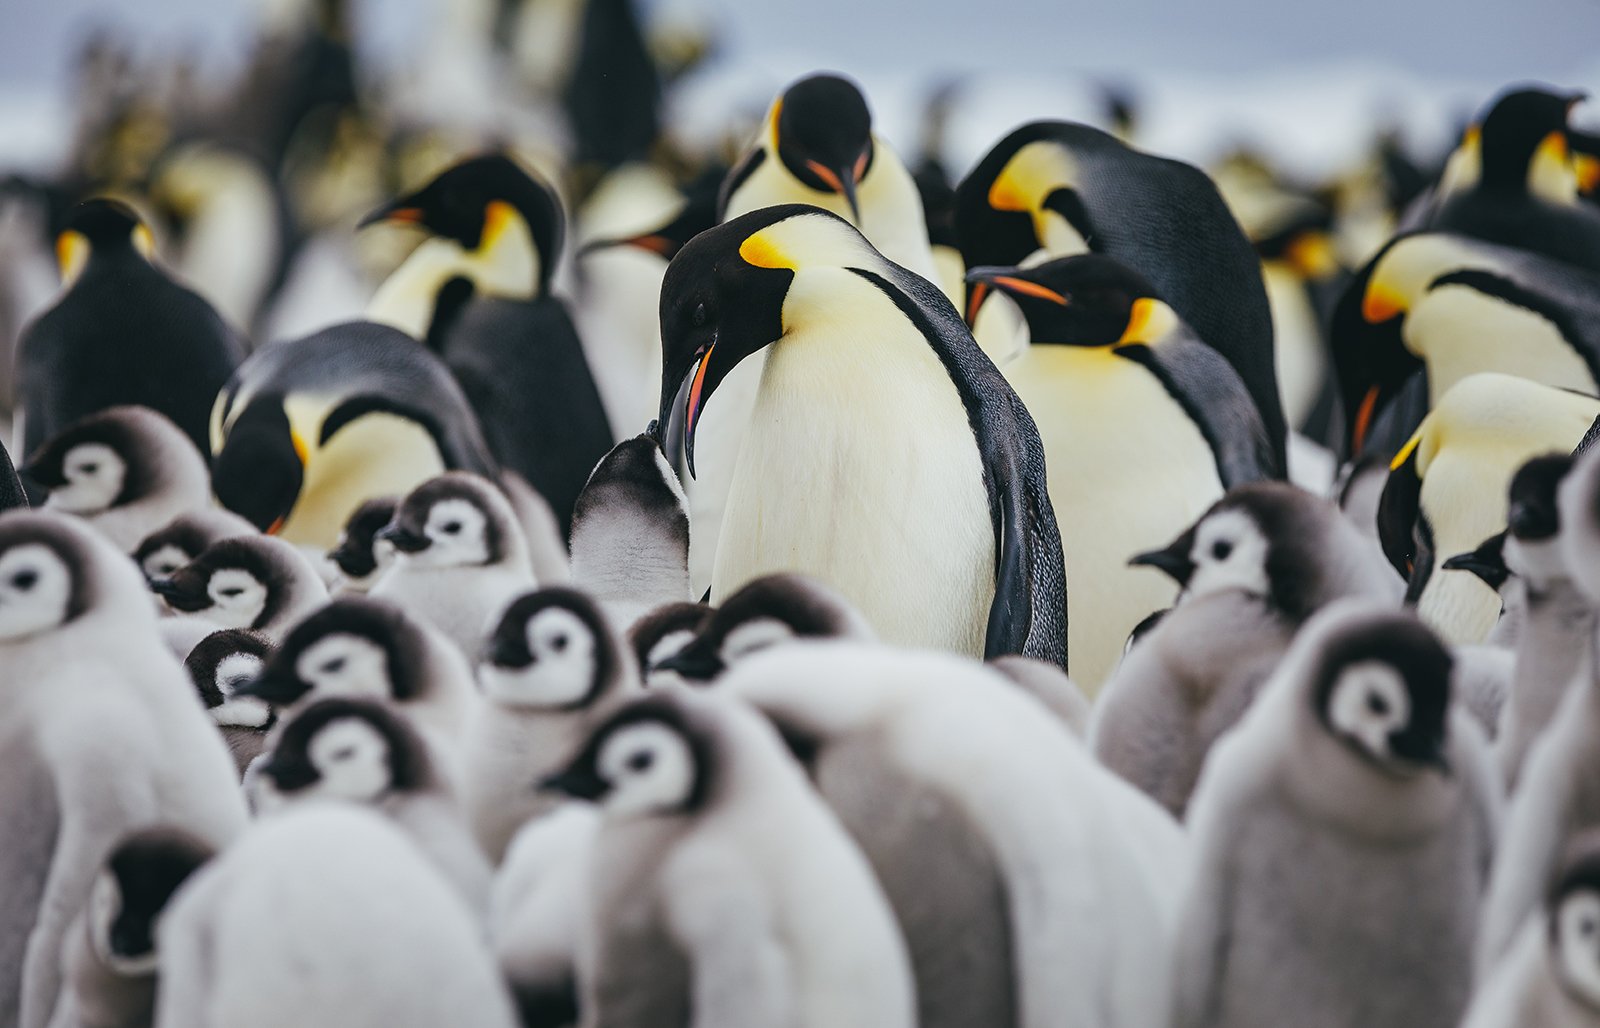 Penguins, facts and photos